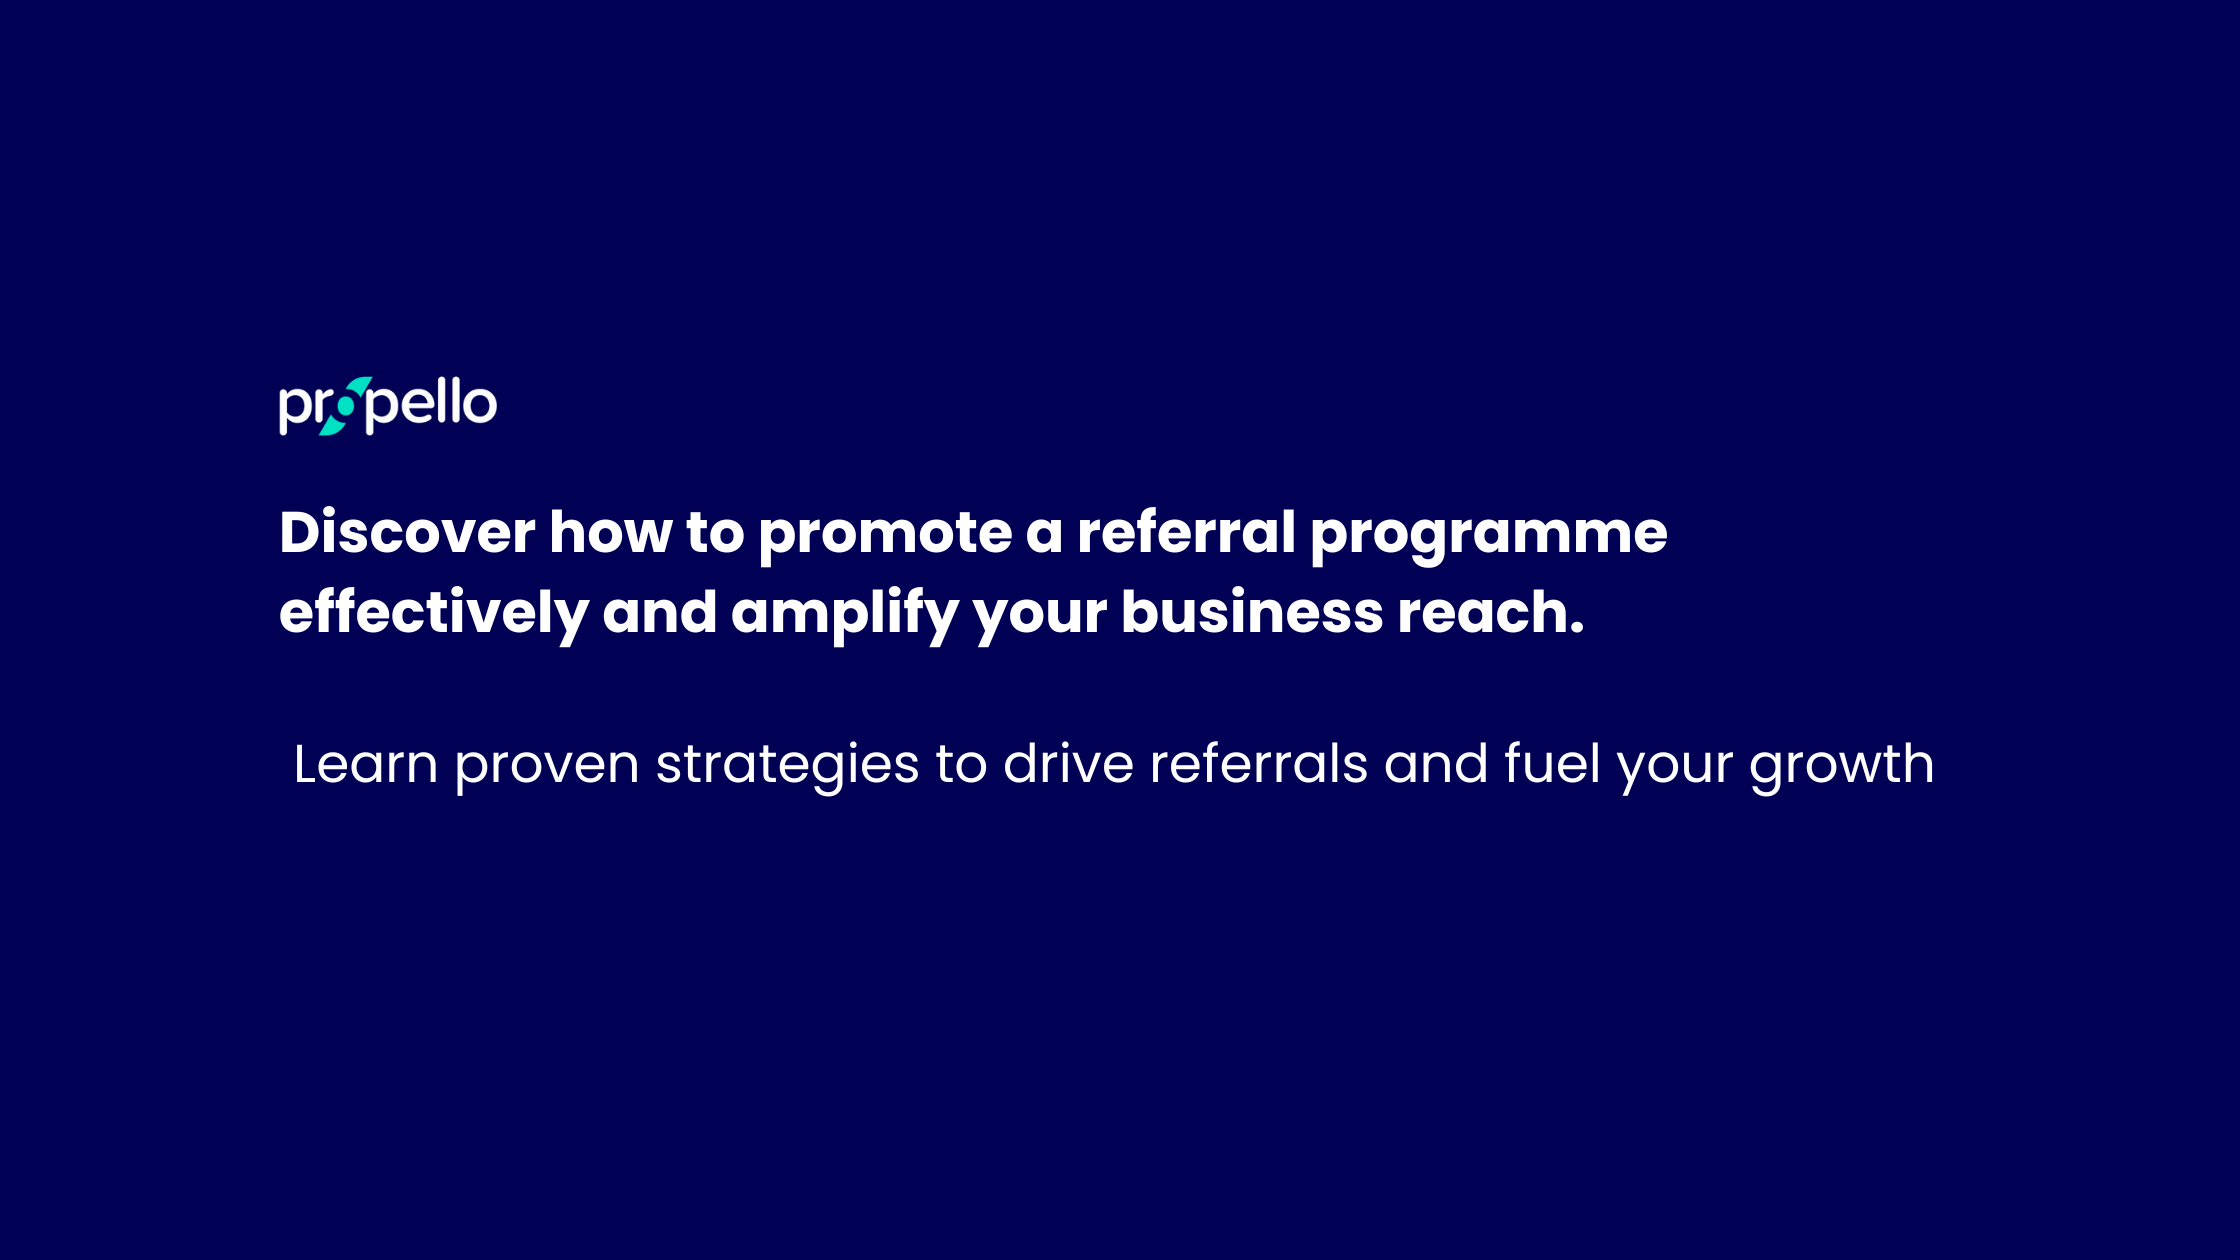 How to promote a referral program